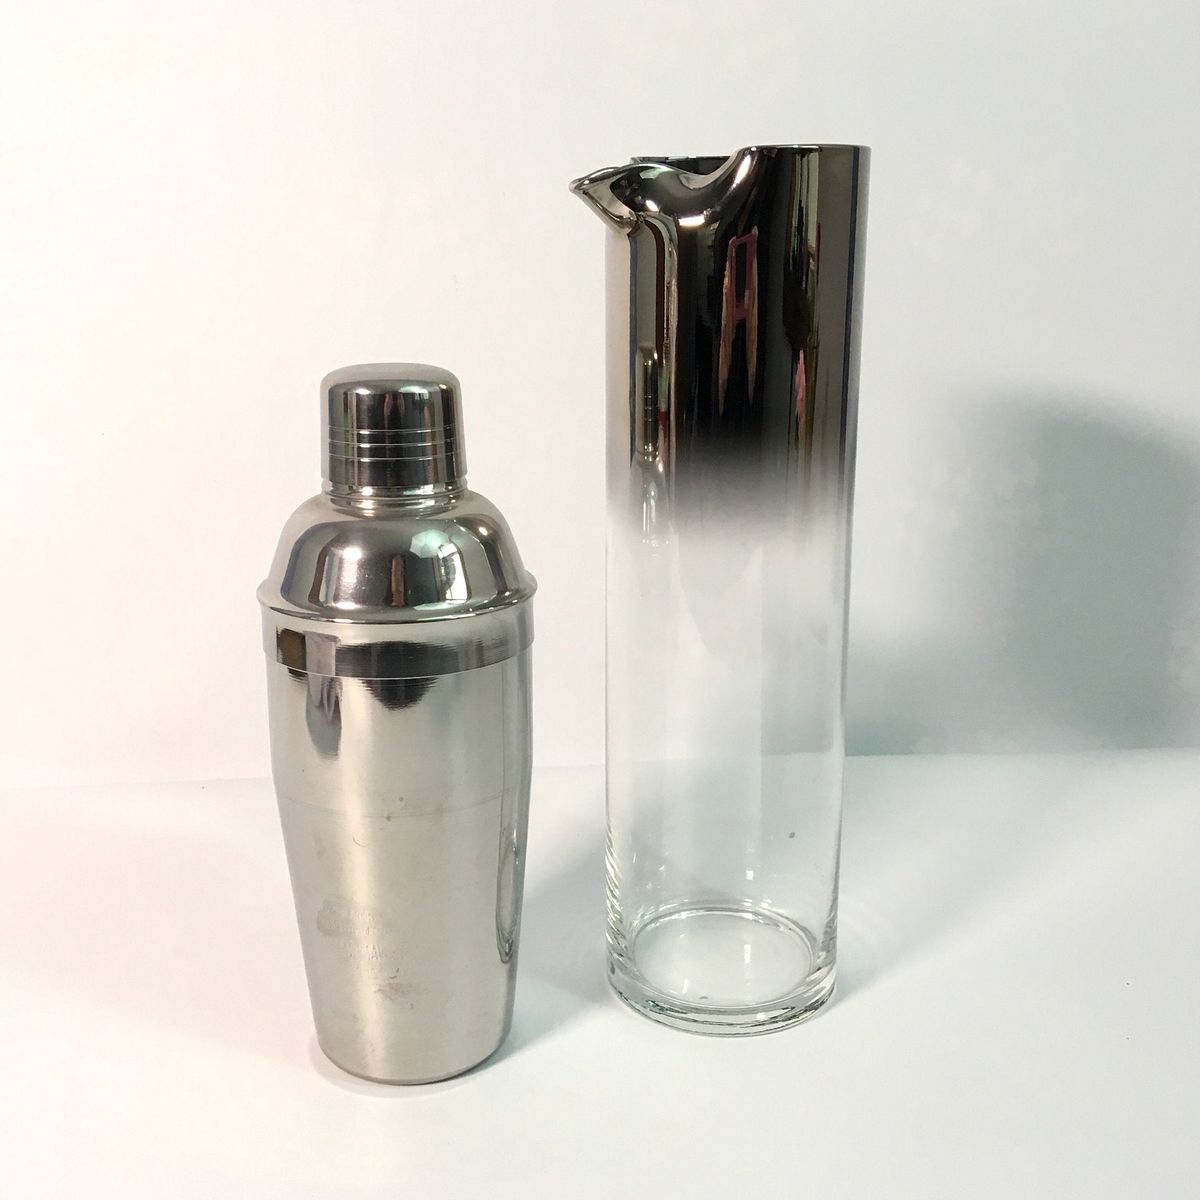 ON SALE NOW Pair of Vintage Glass Barware Cocktail Shakers